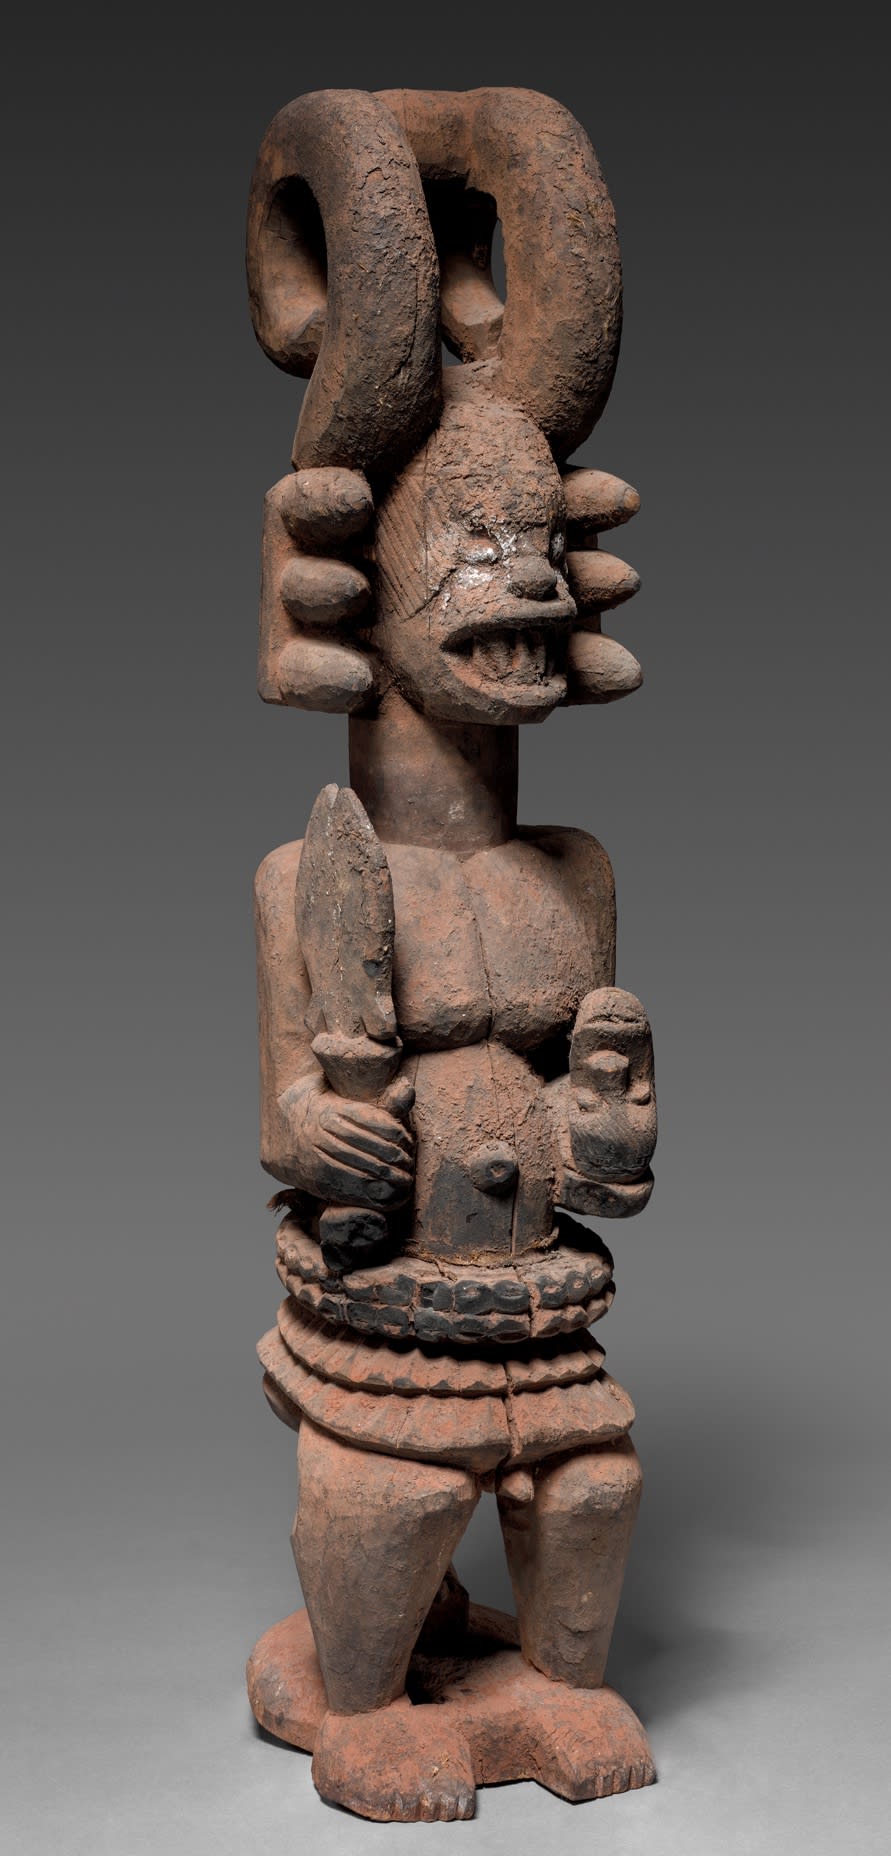 Ikenga figure. Height: 73,5 cm. Image courtesy of the Cleveland Museum of Art.